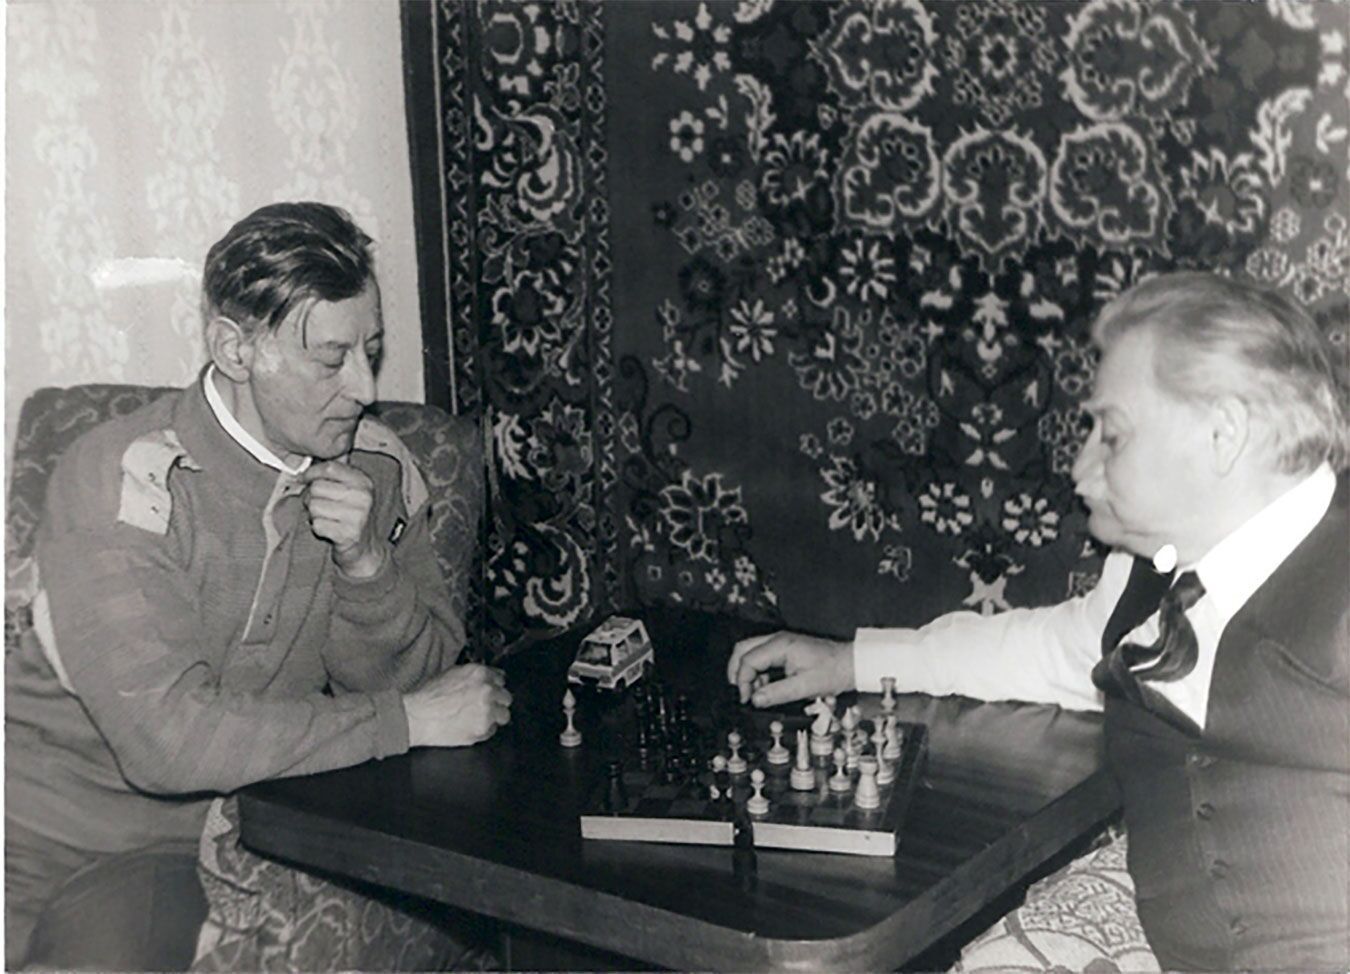 Gregory's father (L) playing chess with Bella's father (R)